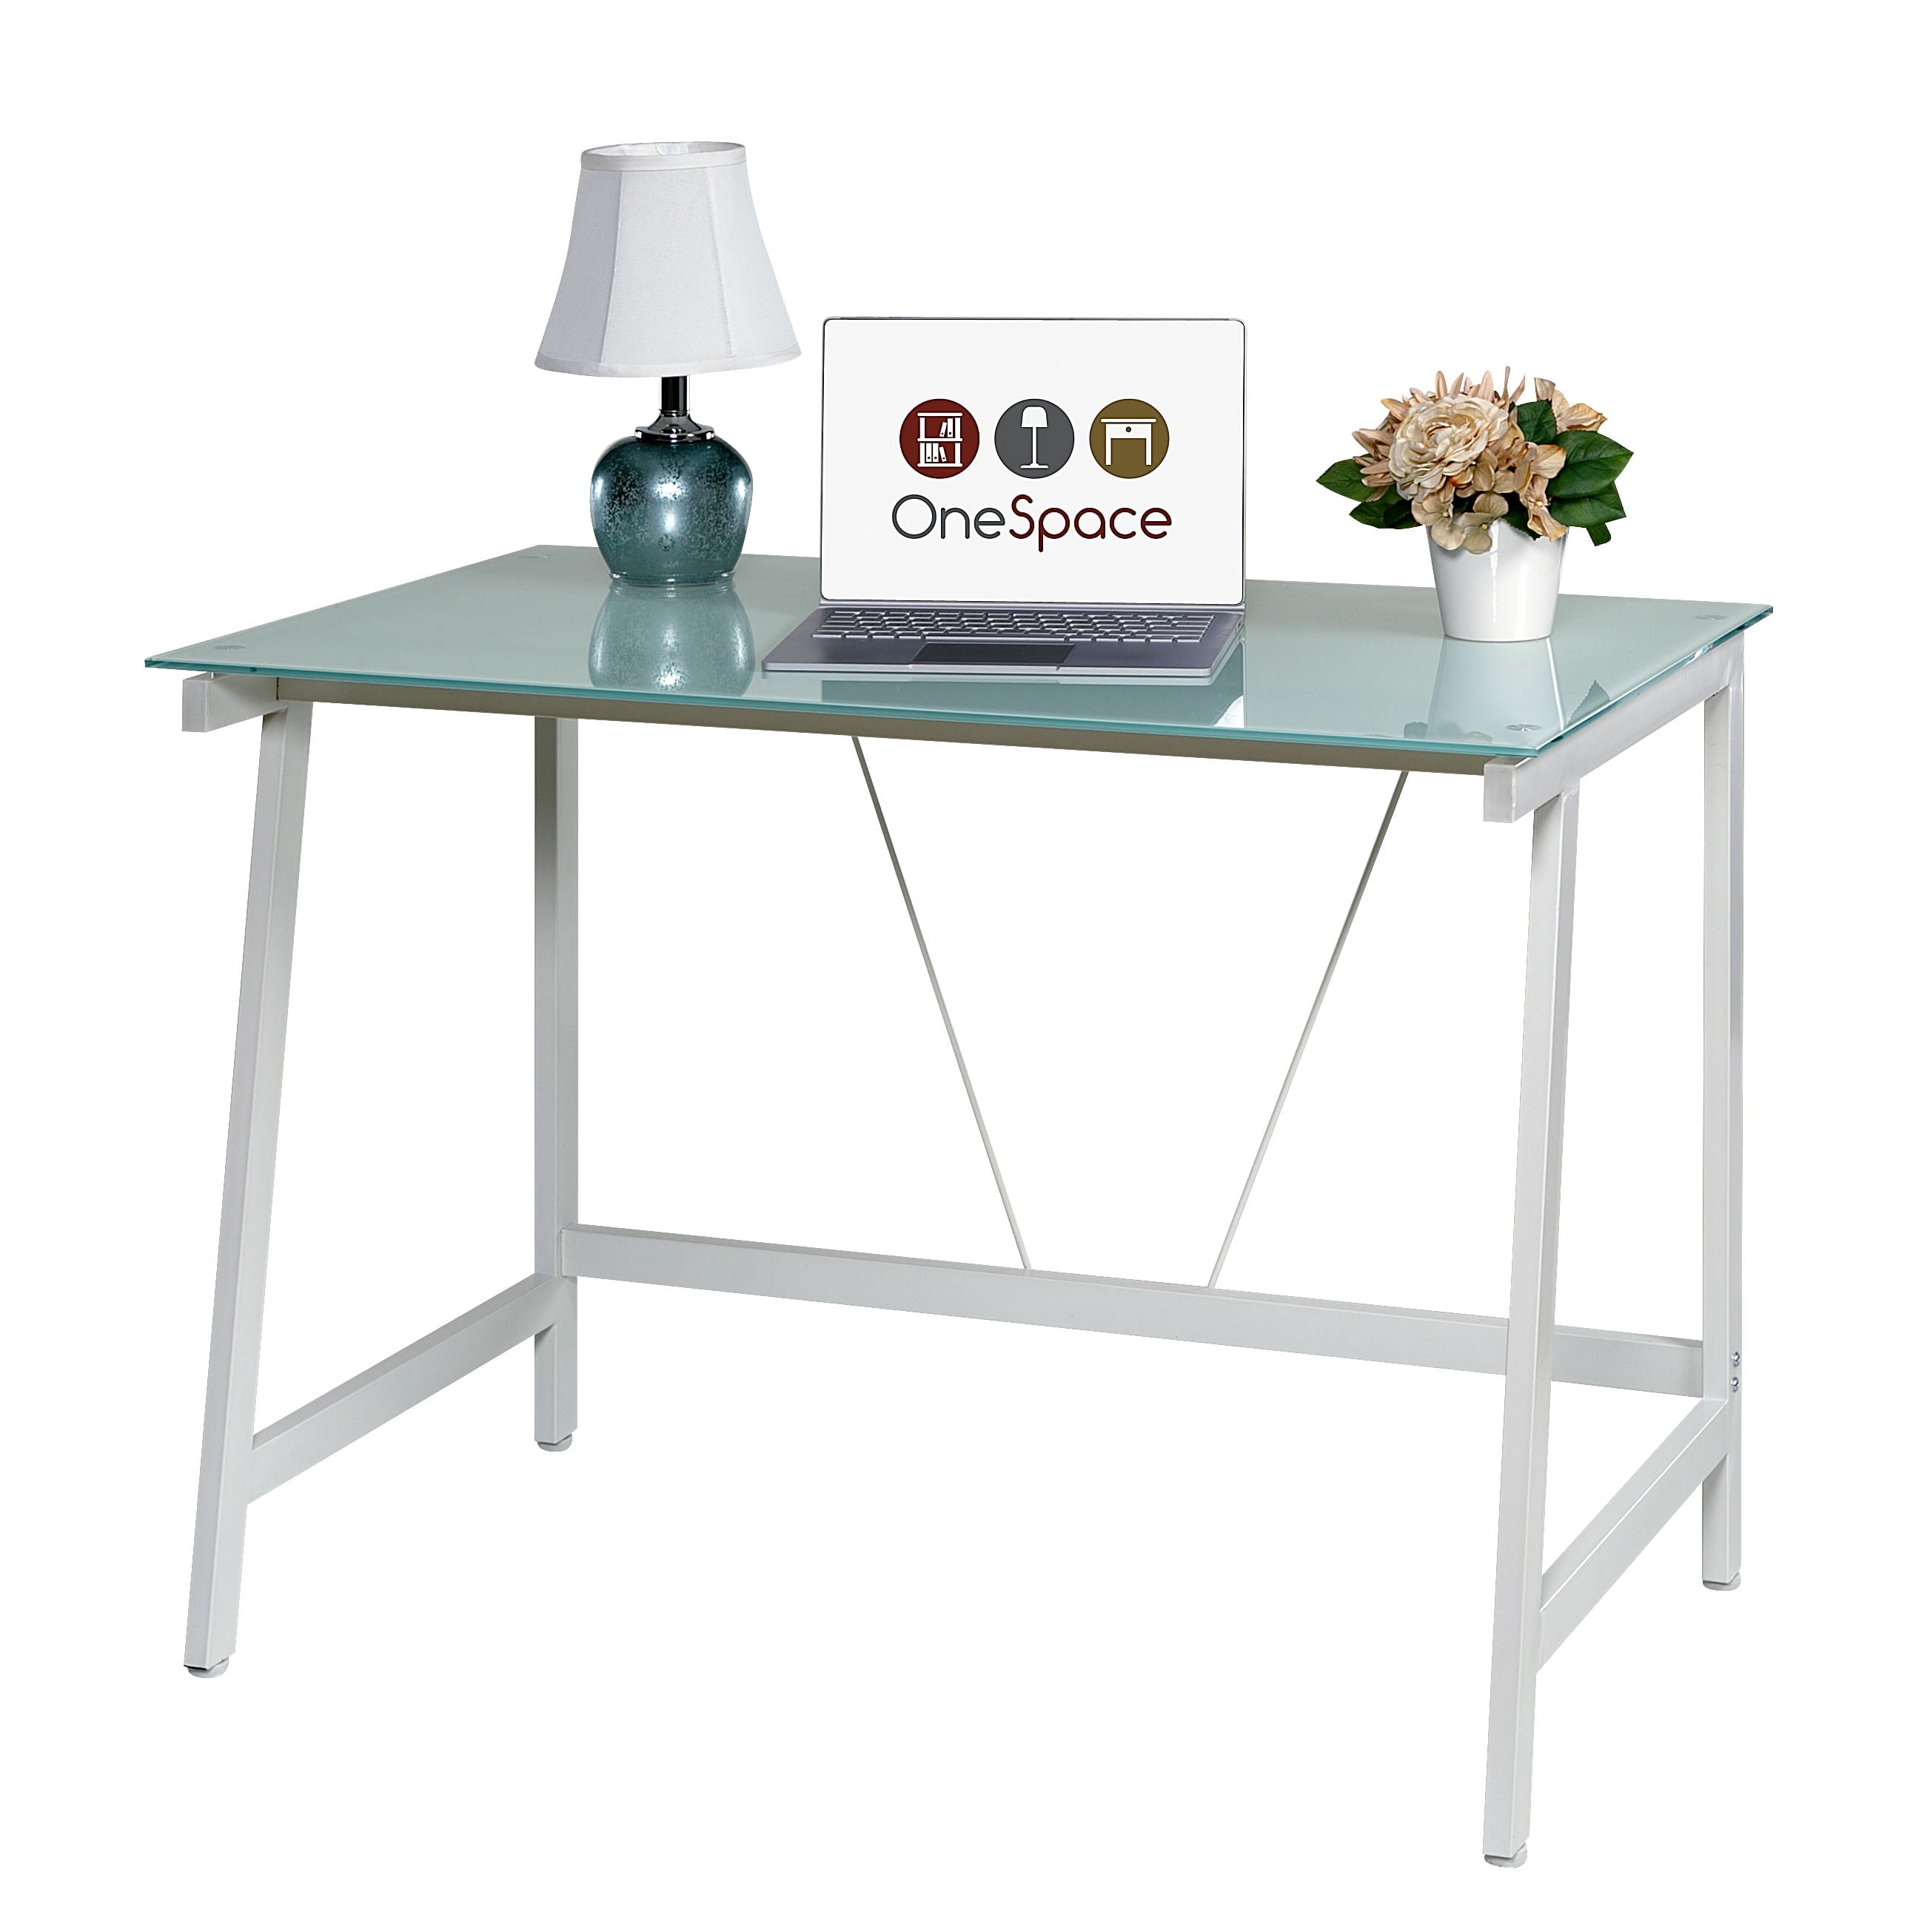 Comfort Products 50-hd0107 Contemporary Glass Writing Desk, Steel Frame - White & Cool Blue